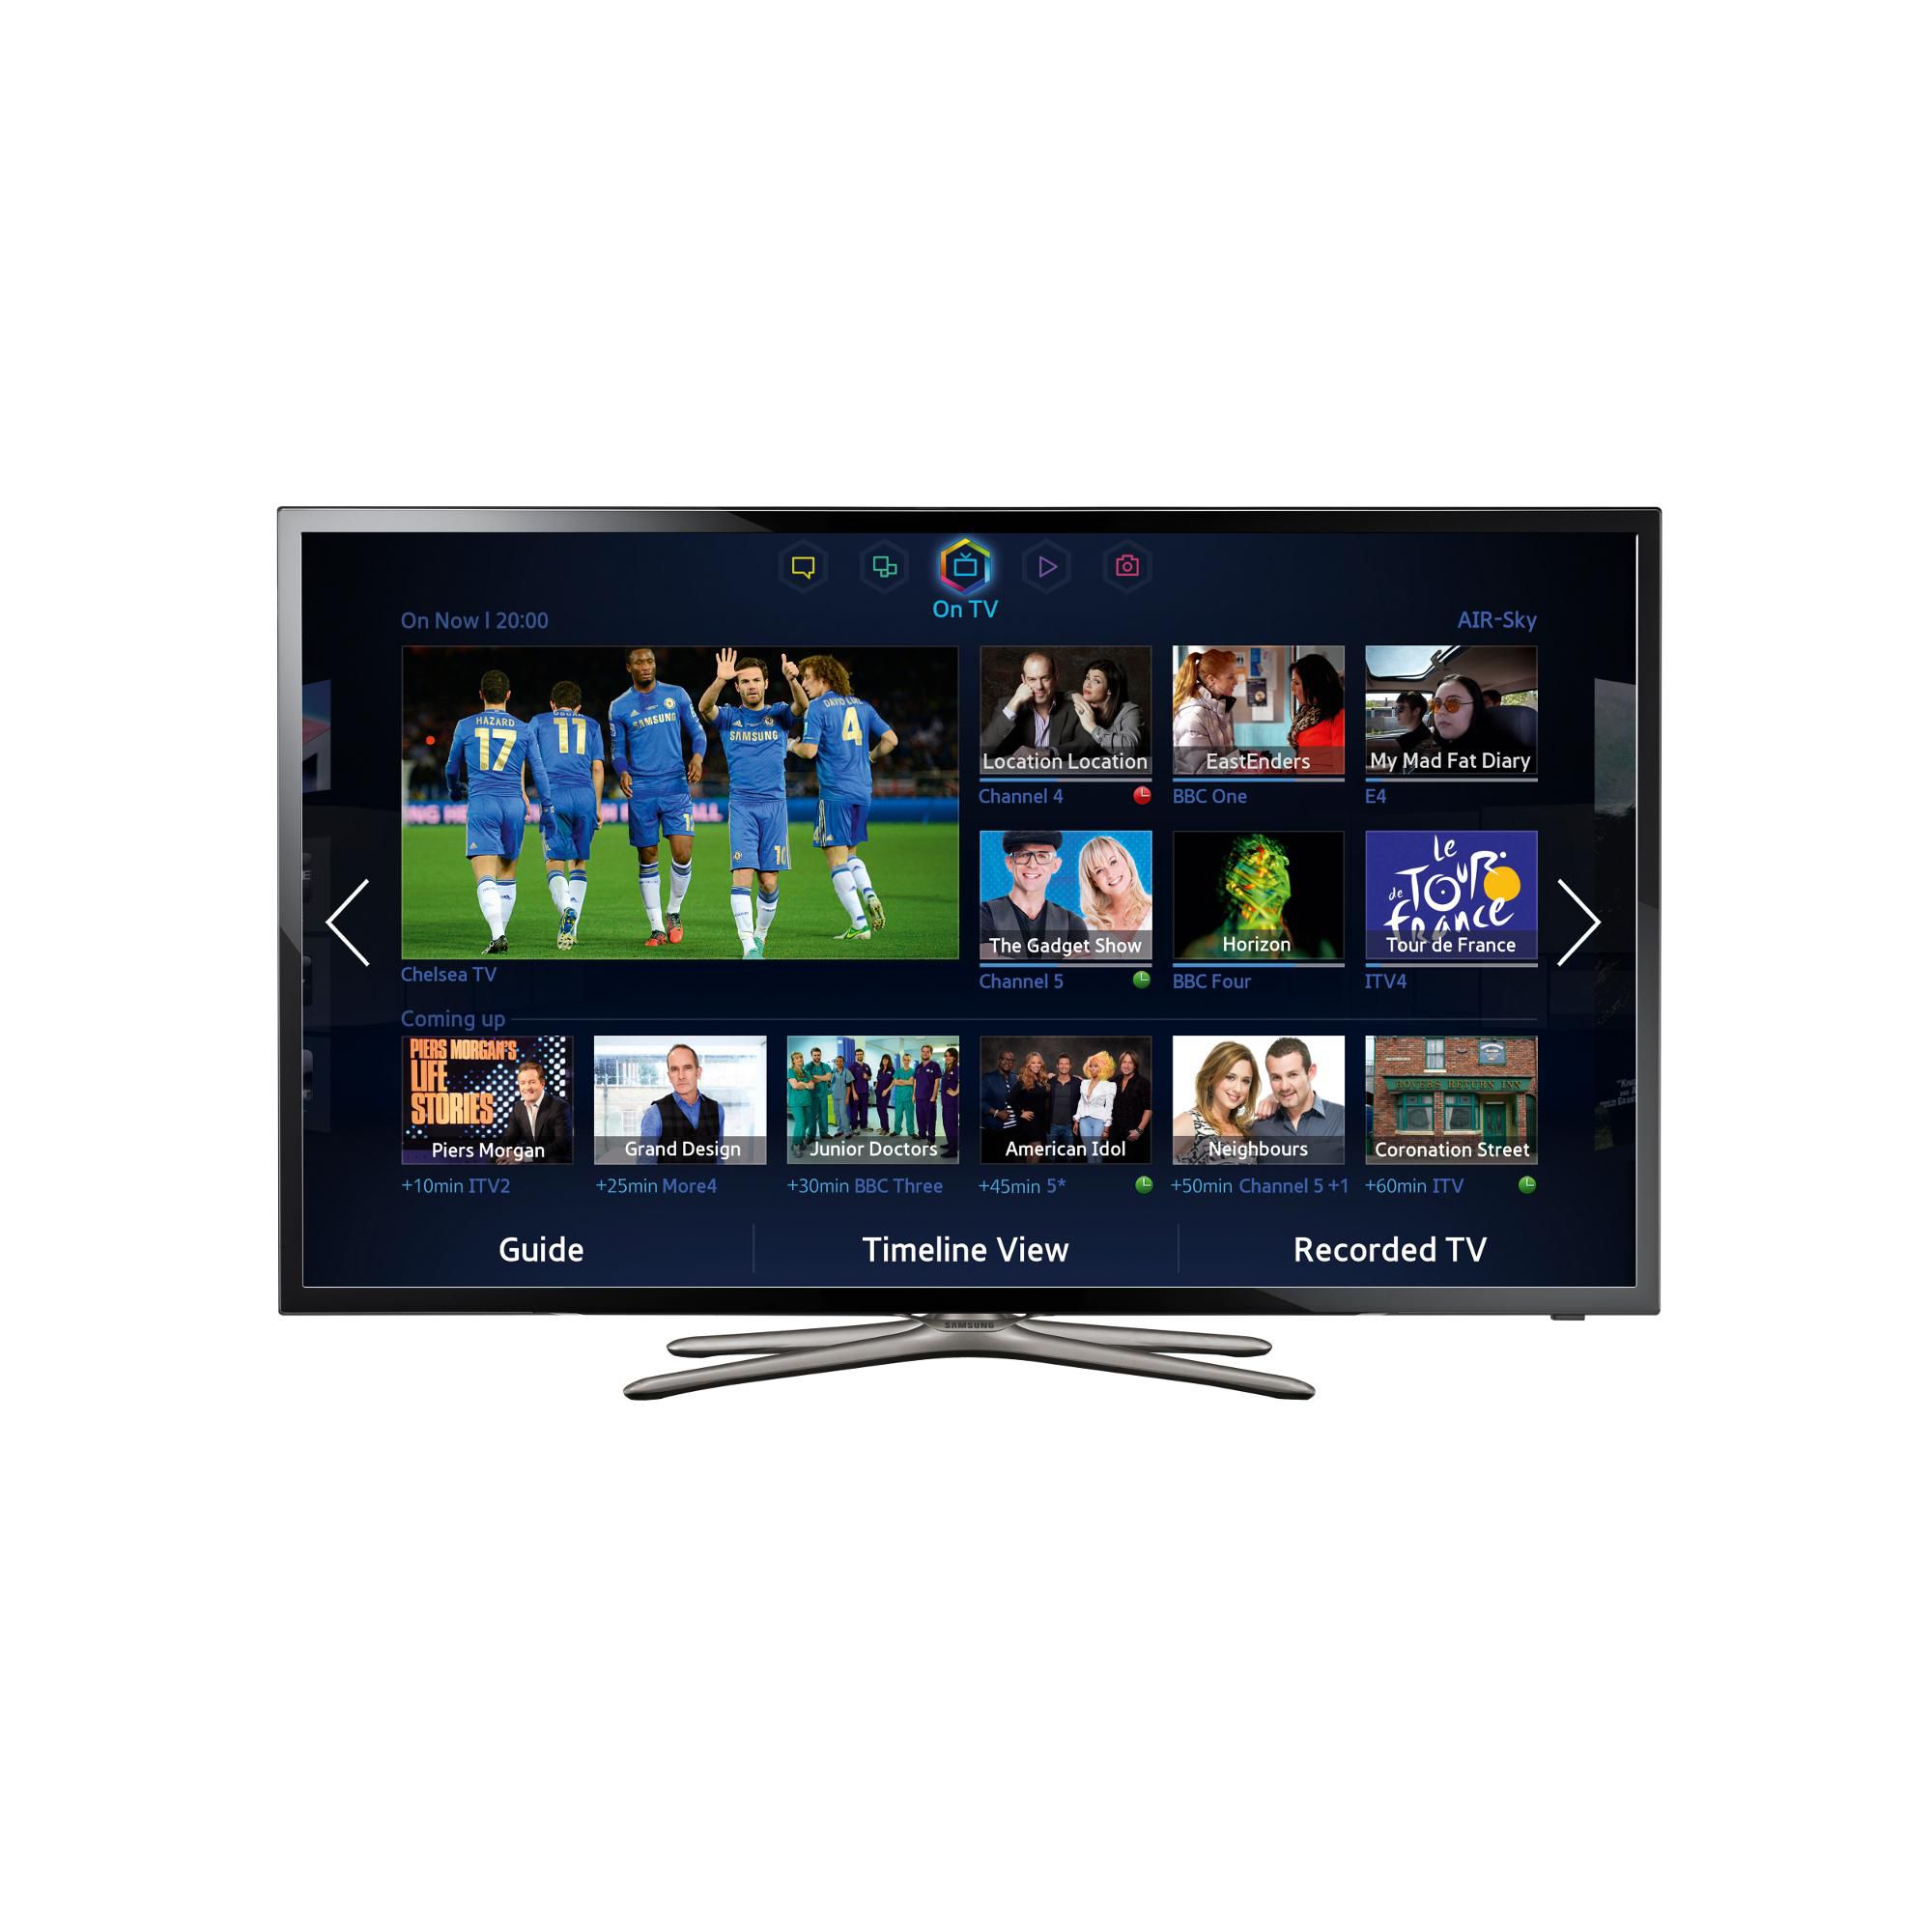 Samsung Series 5 F5500 (32 inch) Smart Full HD LED Television